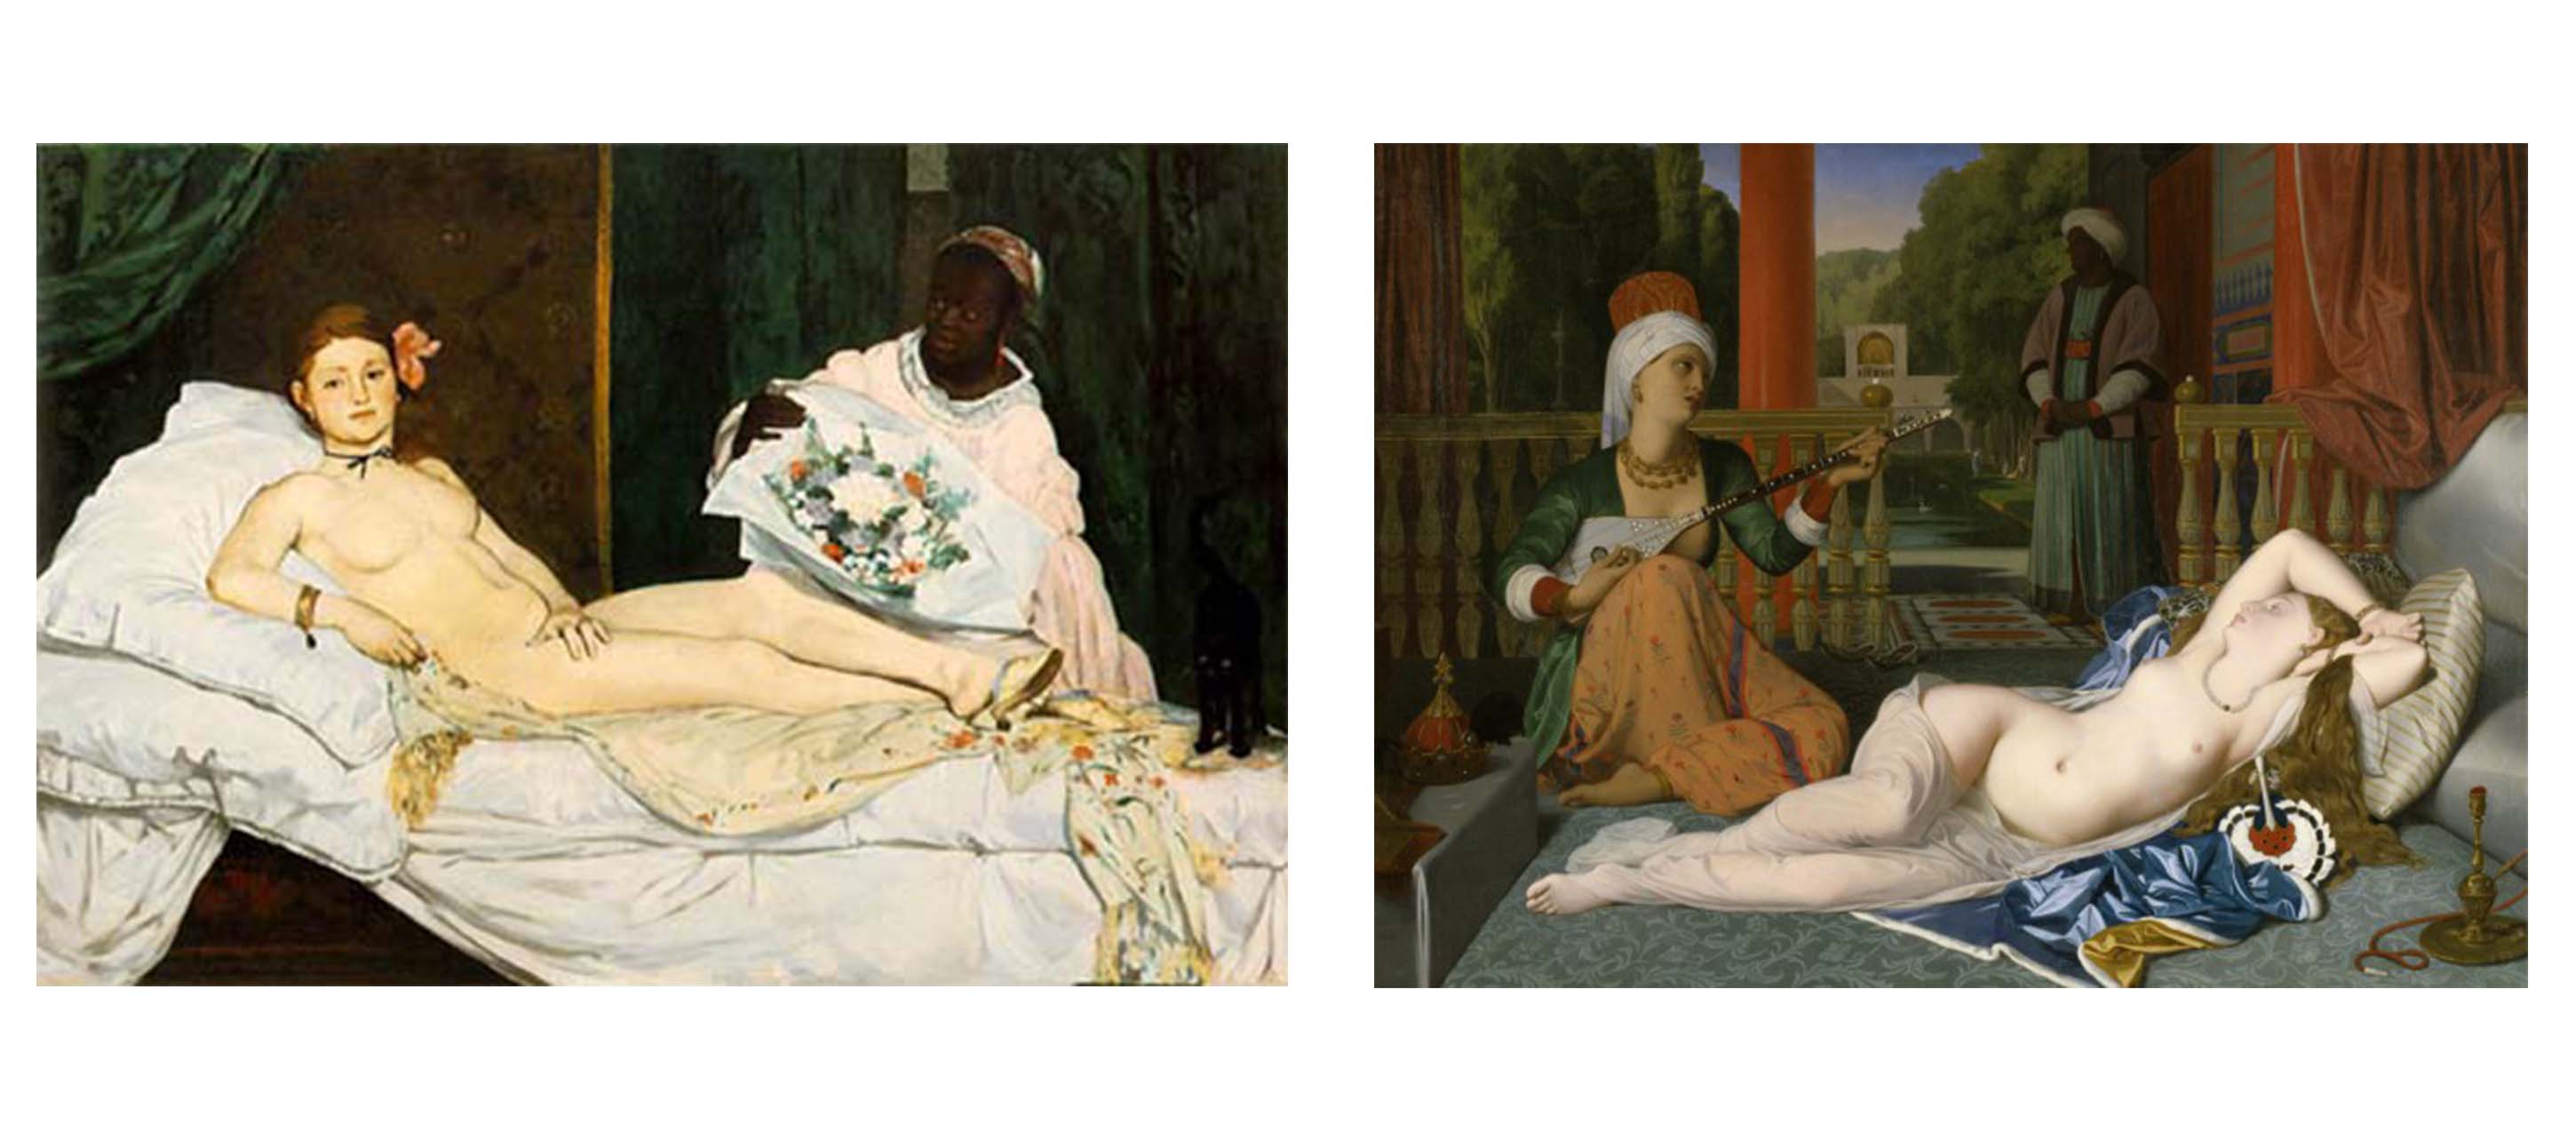 left: a nude white woman sits on a bed, propped up against pillows. a black woman stands behind her, offering her a bouquet of flowers. right: a nude woman reclines against silken pillows and blankets, listening to another woman play music to her. in the background, a black figure stands by the entrance to the room. 